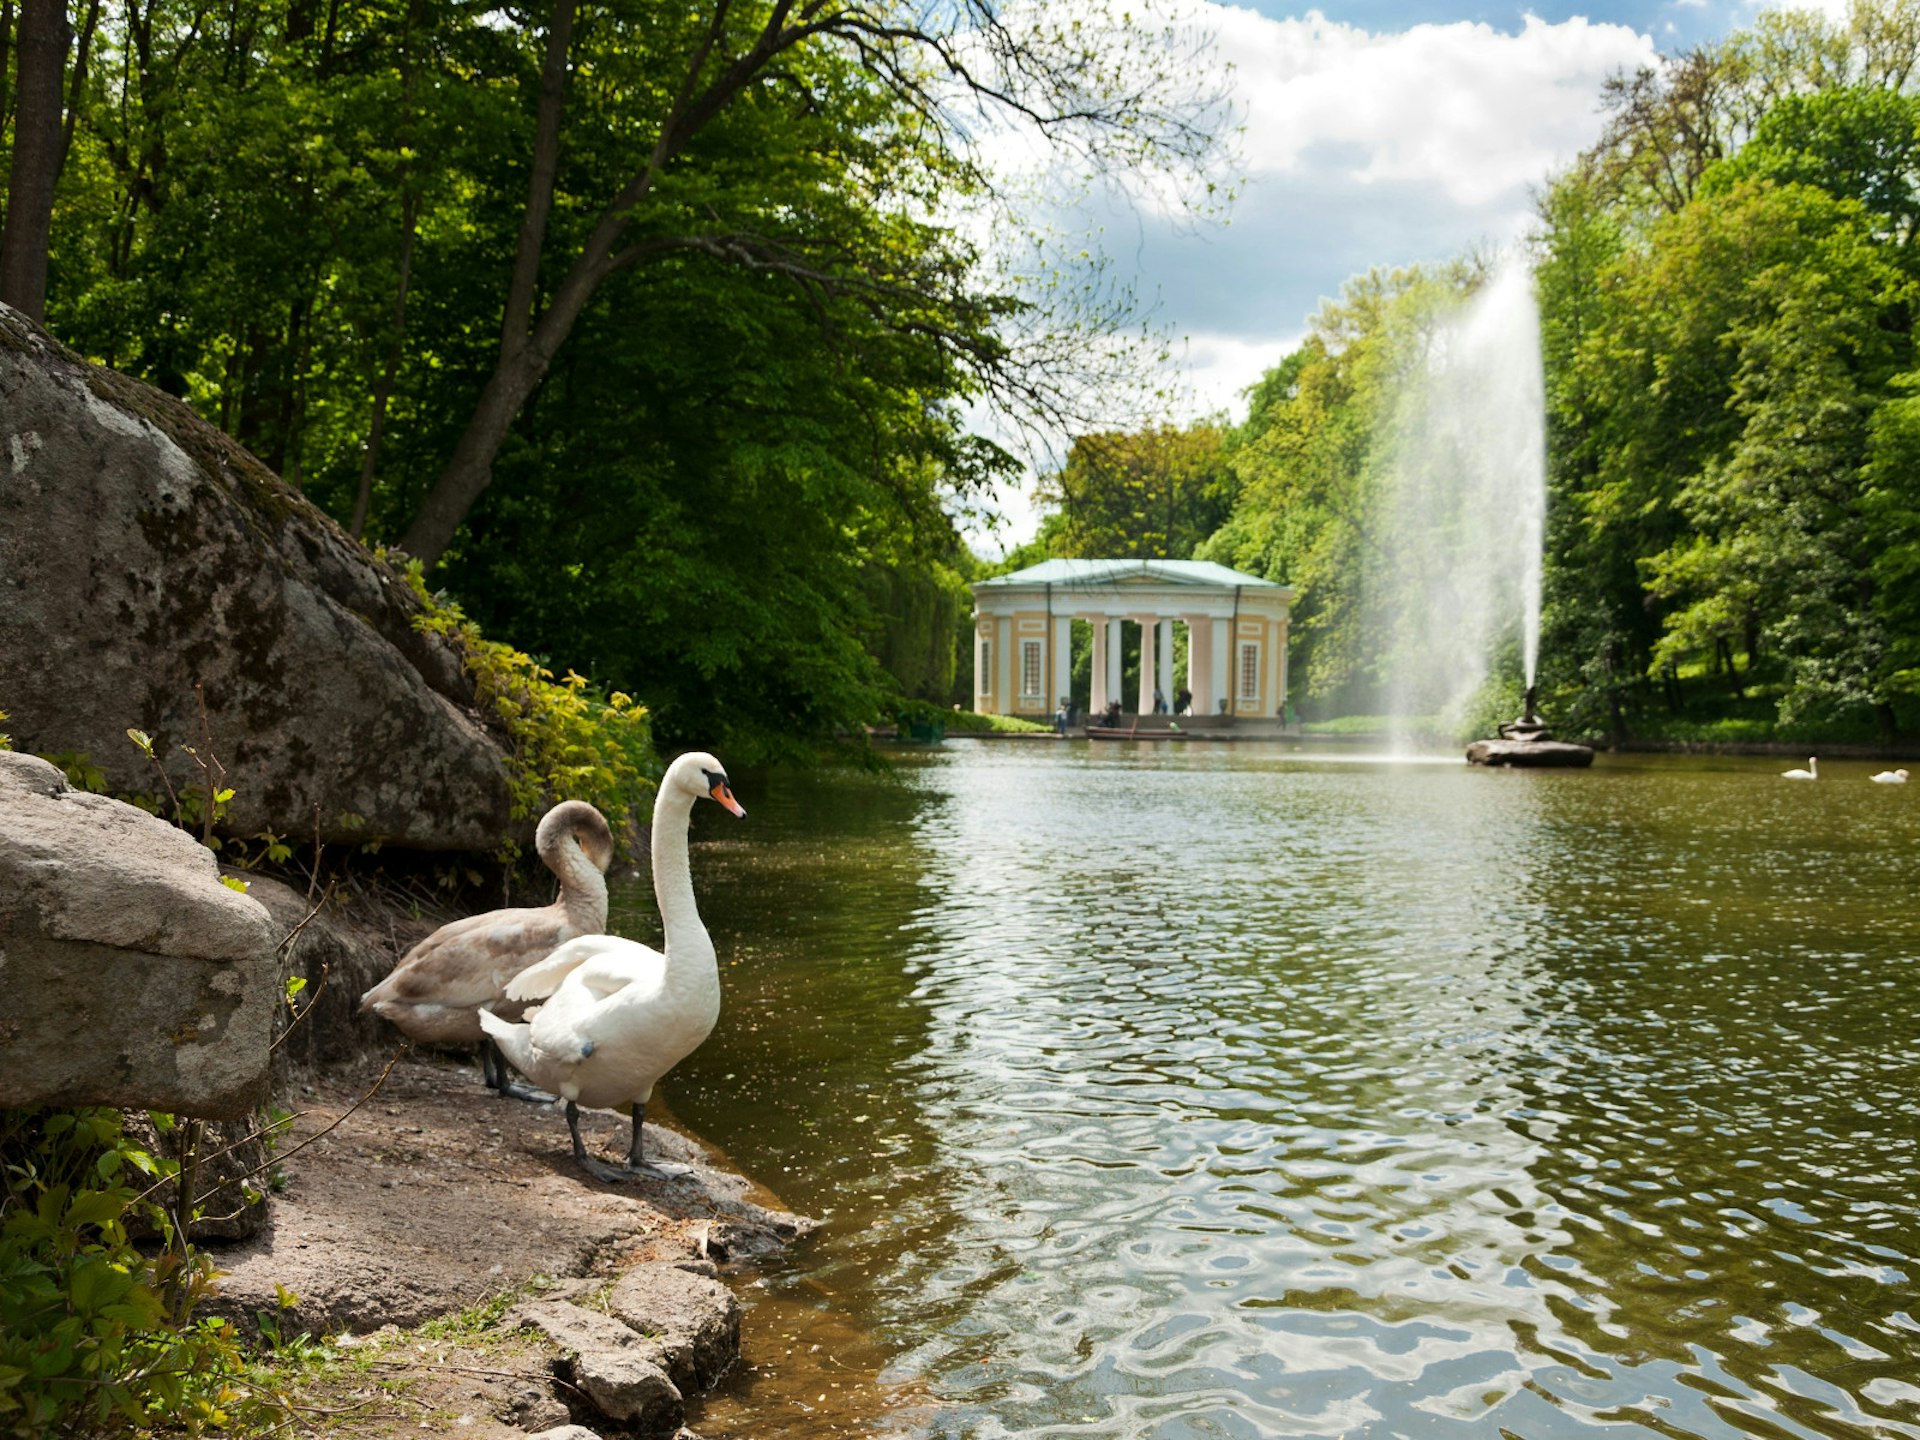 Swans and fountains are part of the idyll in Sofiyivka Park in Uman © Nataliia Dvukhimenna / Shutterstock